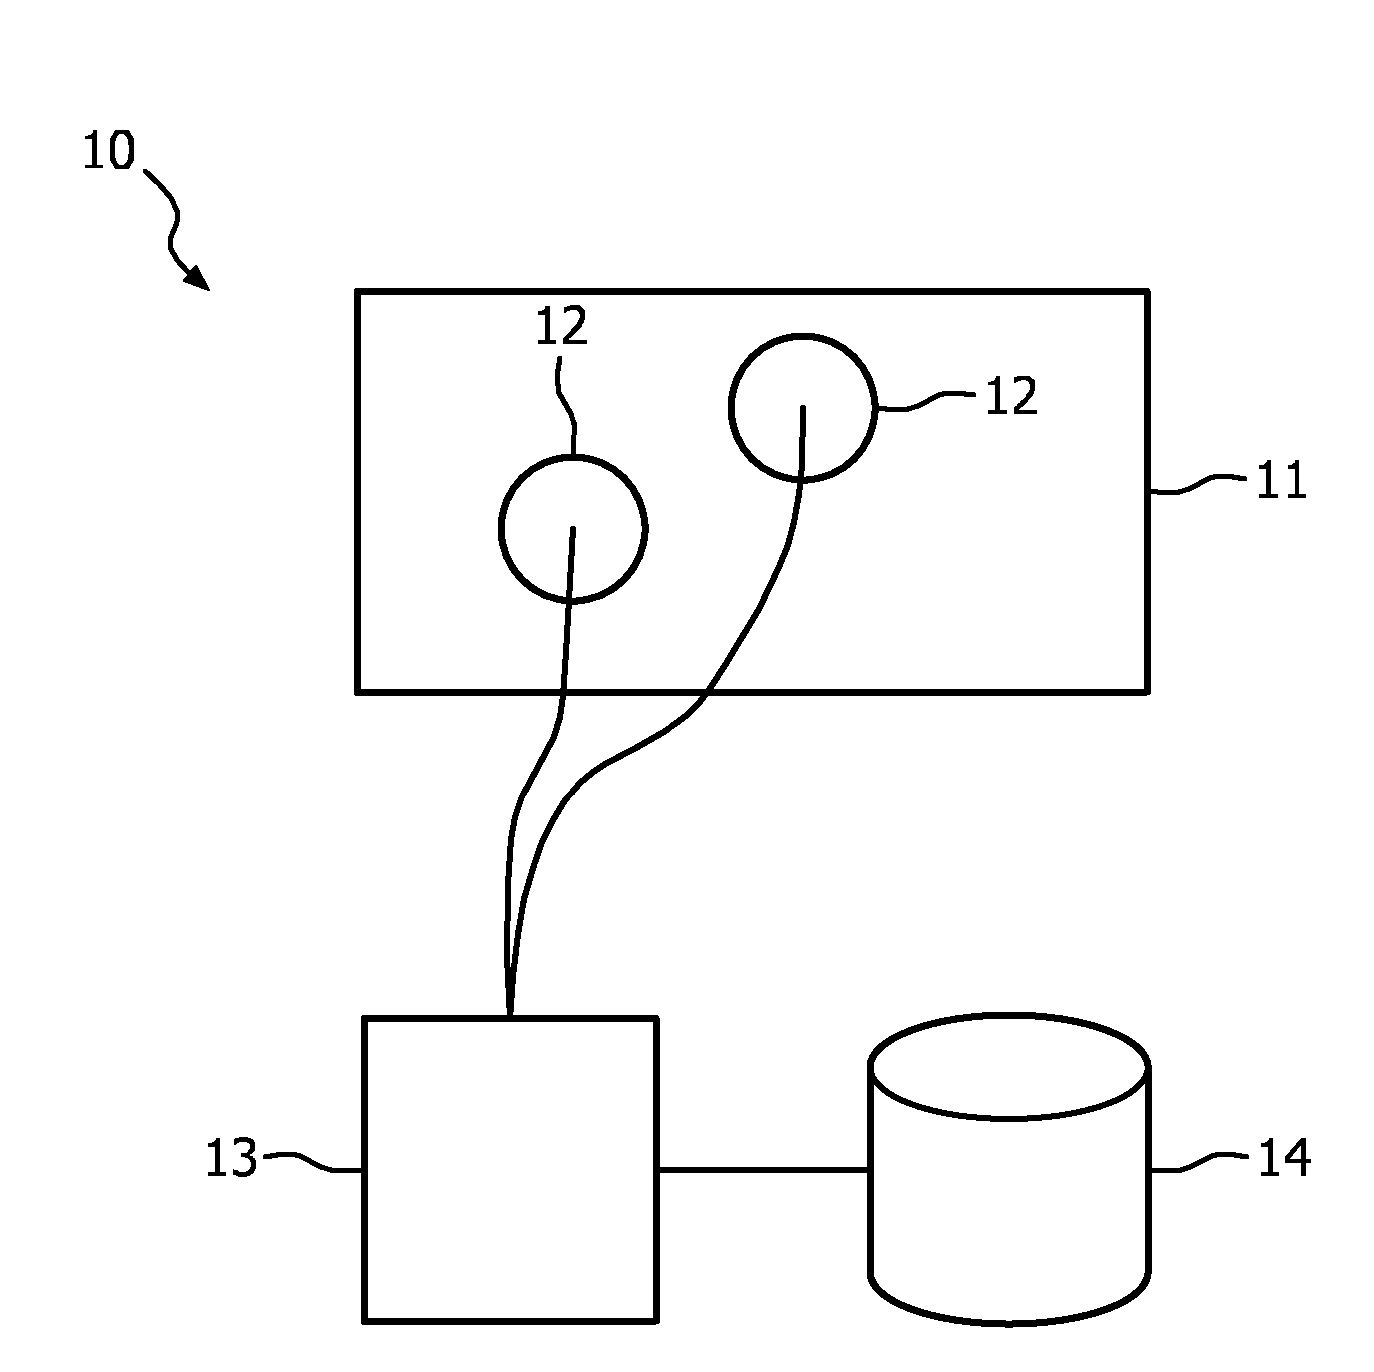 System and method for biometric identification